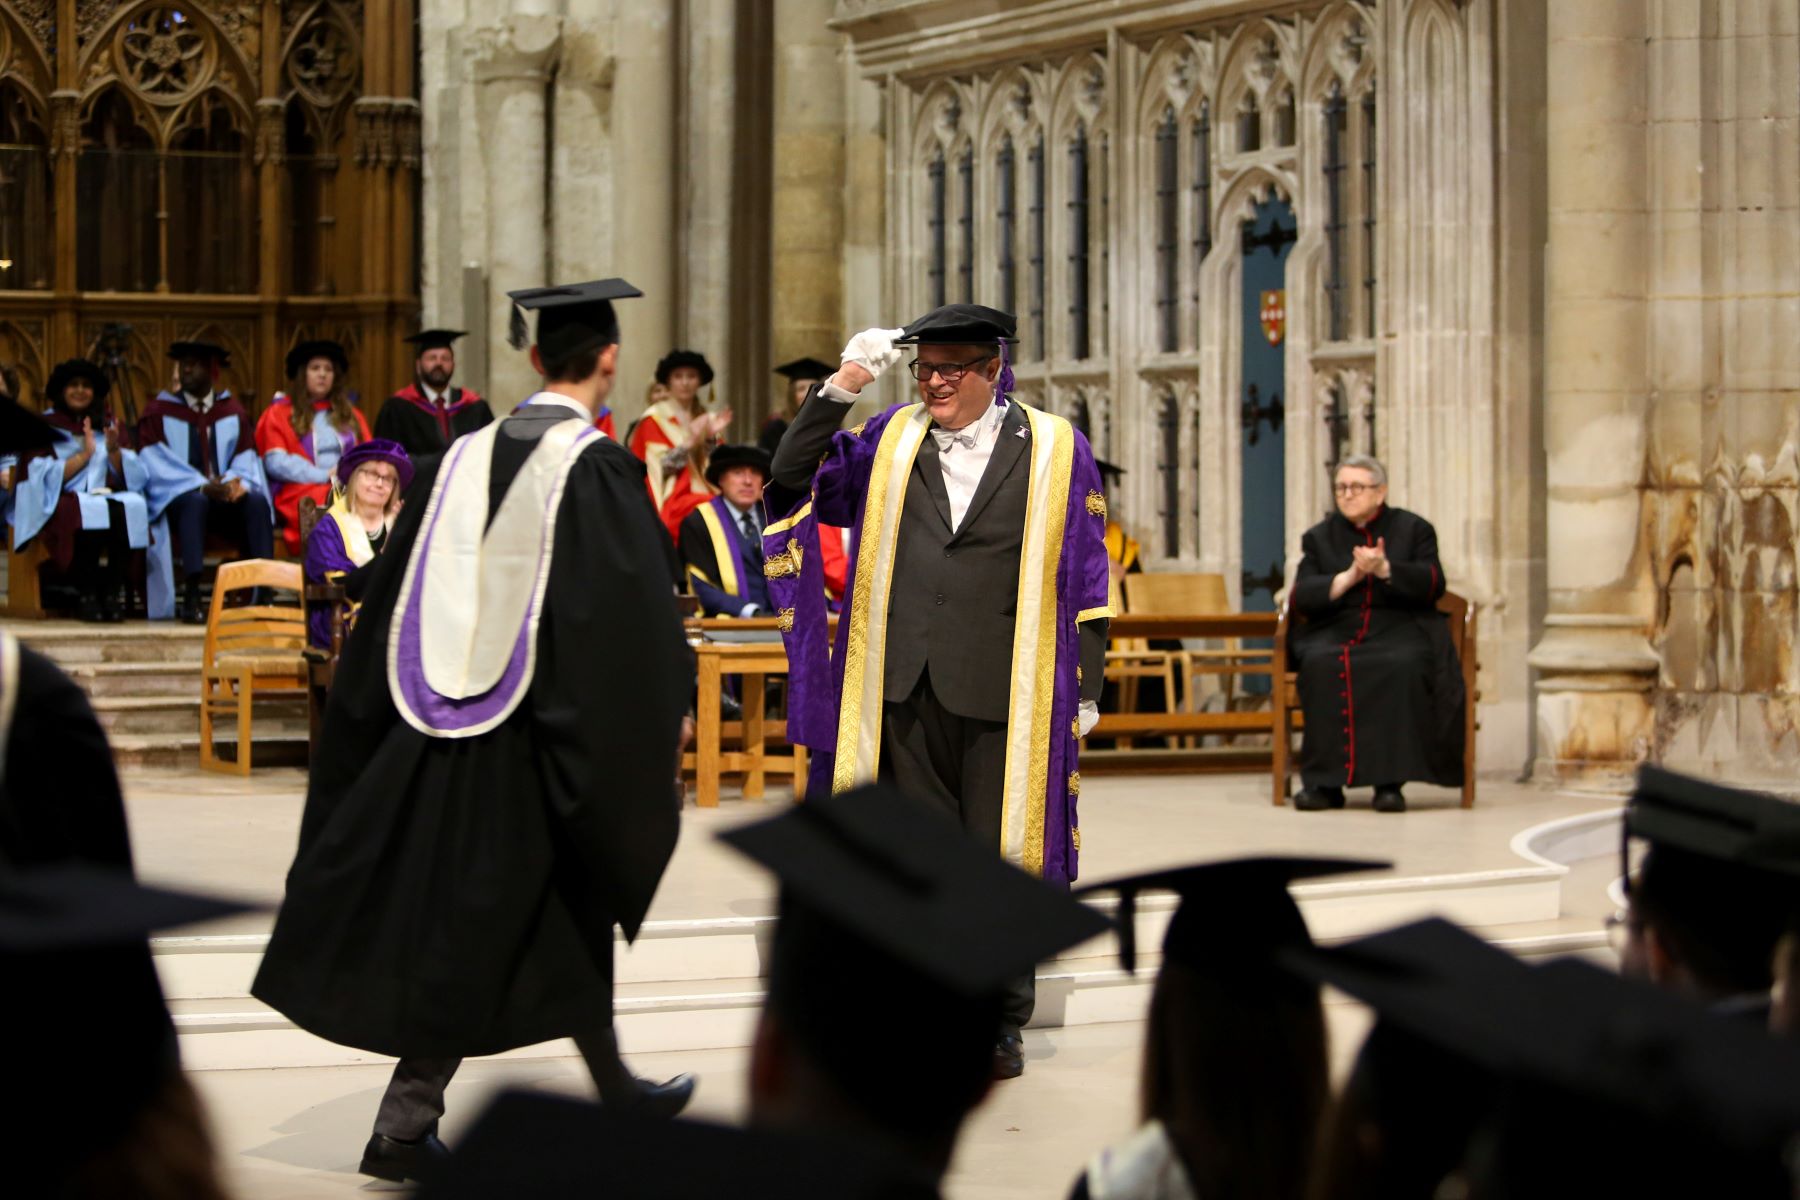 Graduate goes up to meet Pro Chancellor